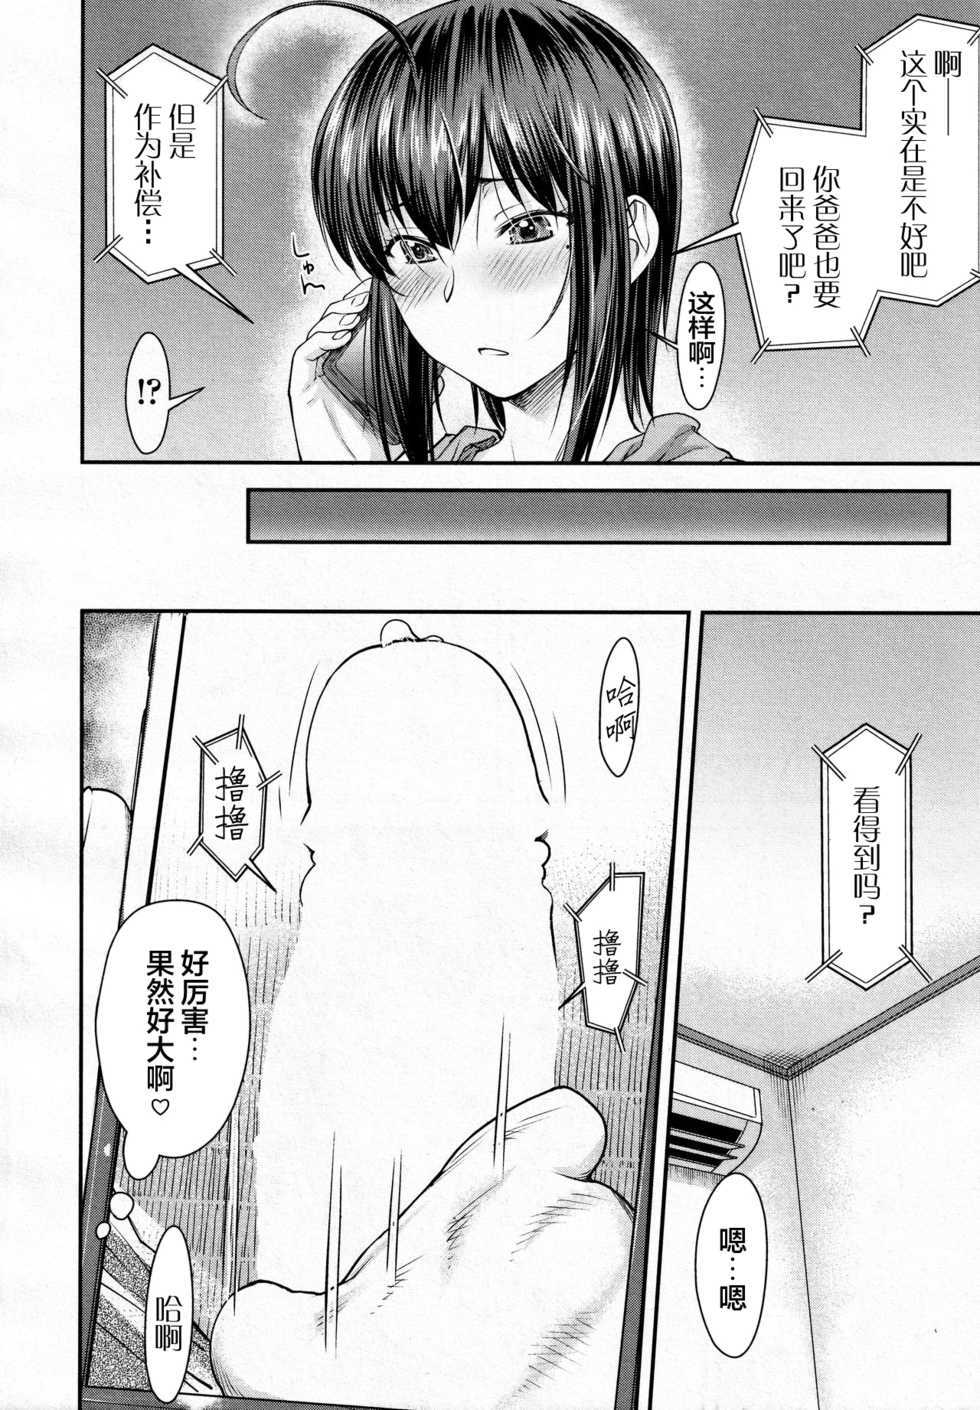 [Nagare Ippon] Kaname Date #11 (COMIC AUN 2020-12) [Chinese] [不可视汉化] [Digital] - Page 7